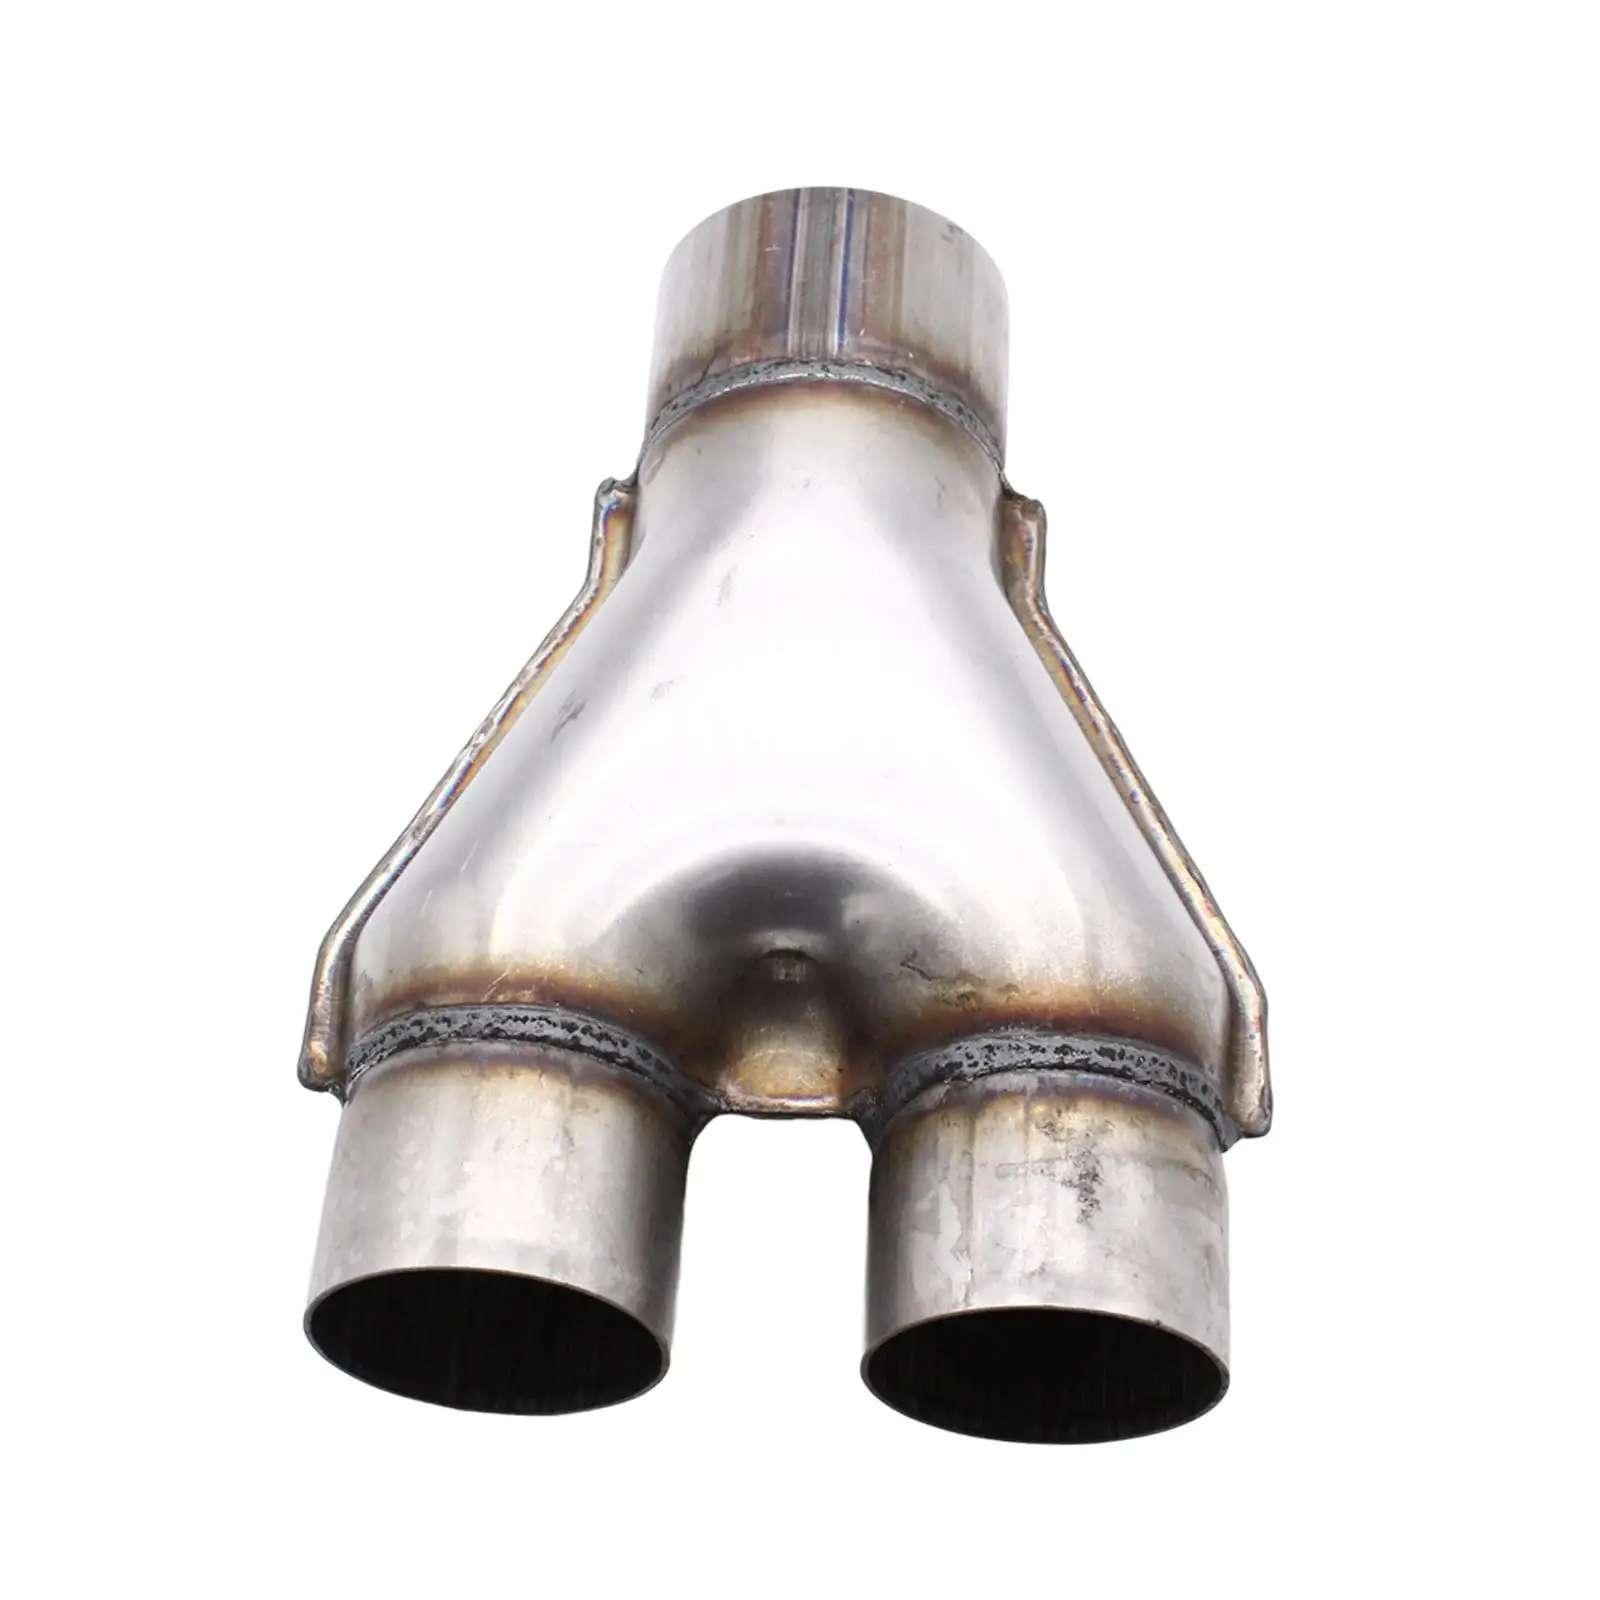 3inch Single to 2 1/2inch Dual Exhaust Adapter Y Pipe Professional Stainless Steel Accessories Weld on for Car Truck Universal